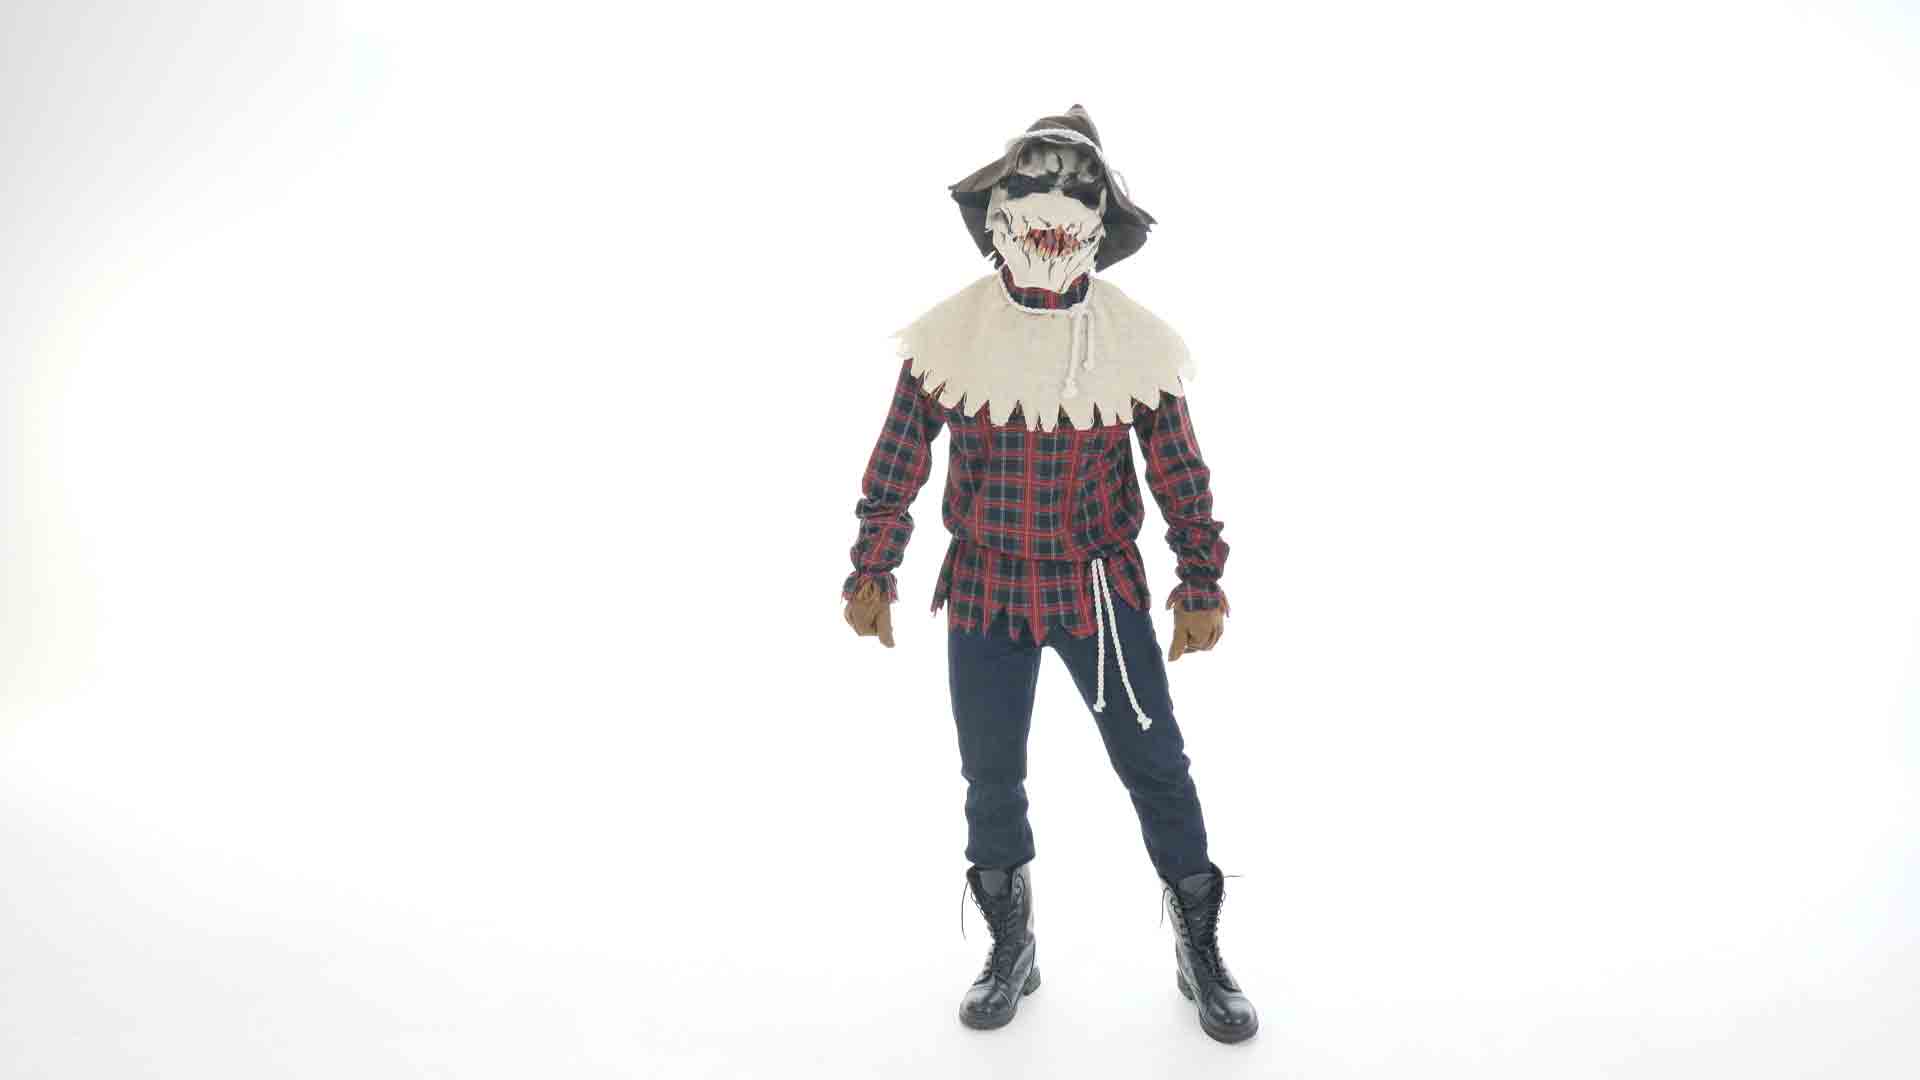 This Adult Sadistic Scarecrow Costume might not scare crows, but it definitely WILL scare humans!